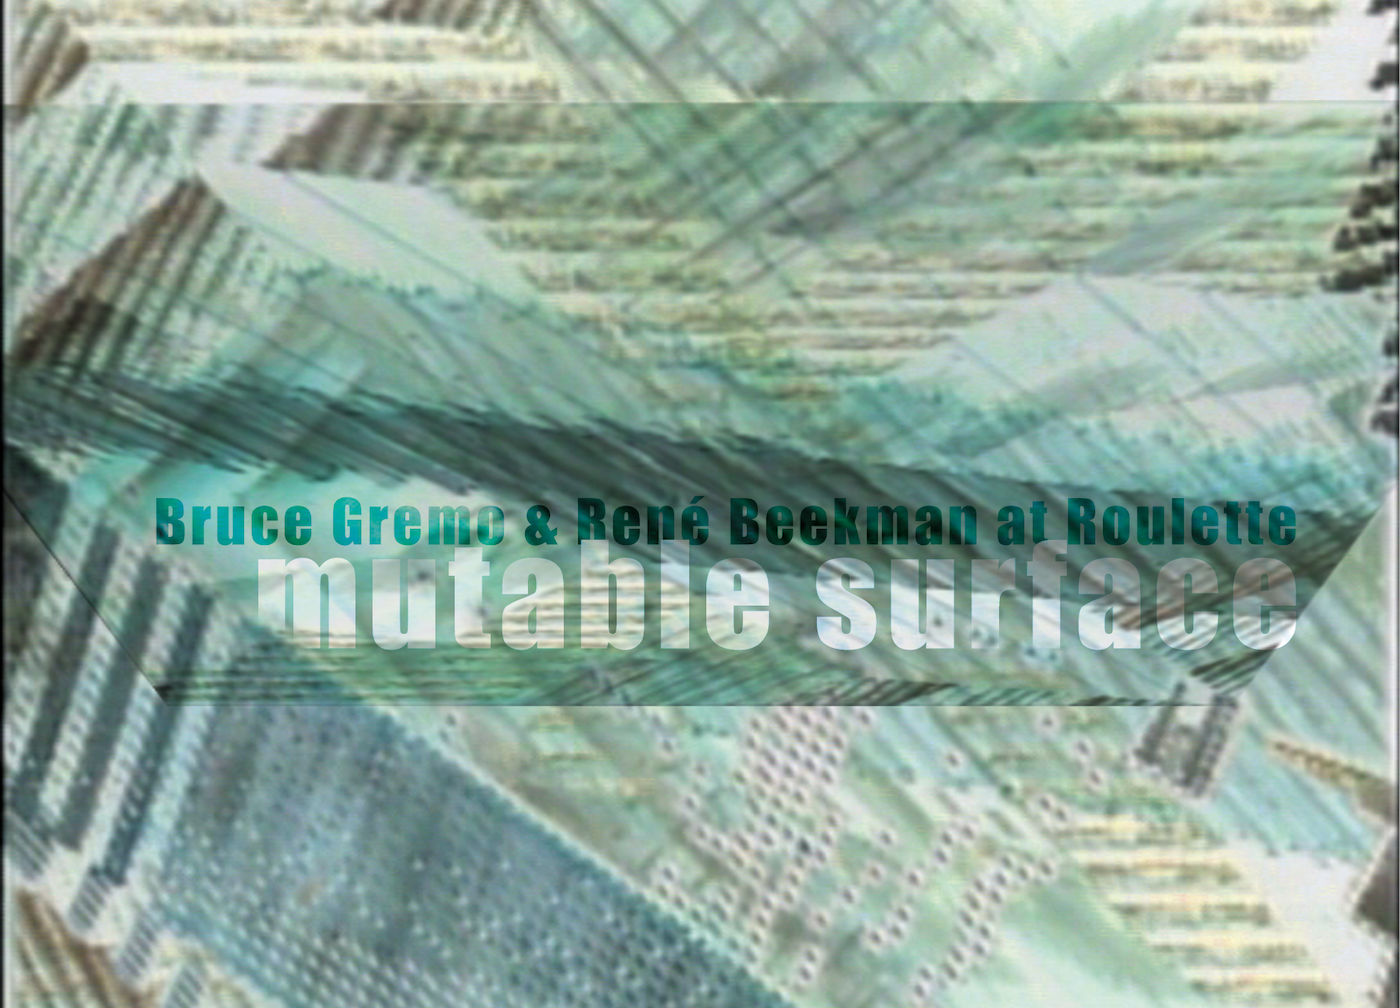 Roulette – Mixology Festival performance Opening 20:30 René Beekman & Bruce Gremo Mutable Surface:inter-routing improvisation using Max/MSP and nato or 14 theaters taken from a certain Chinese encyclopedia